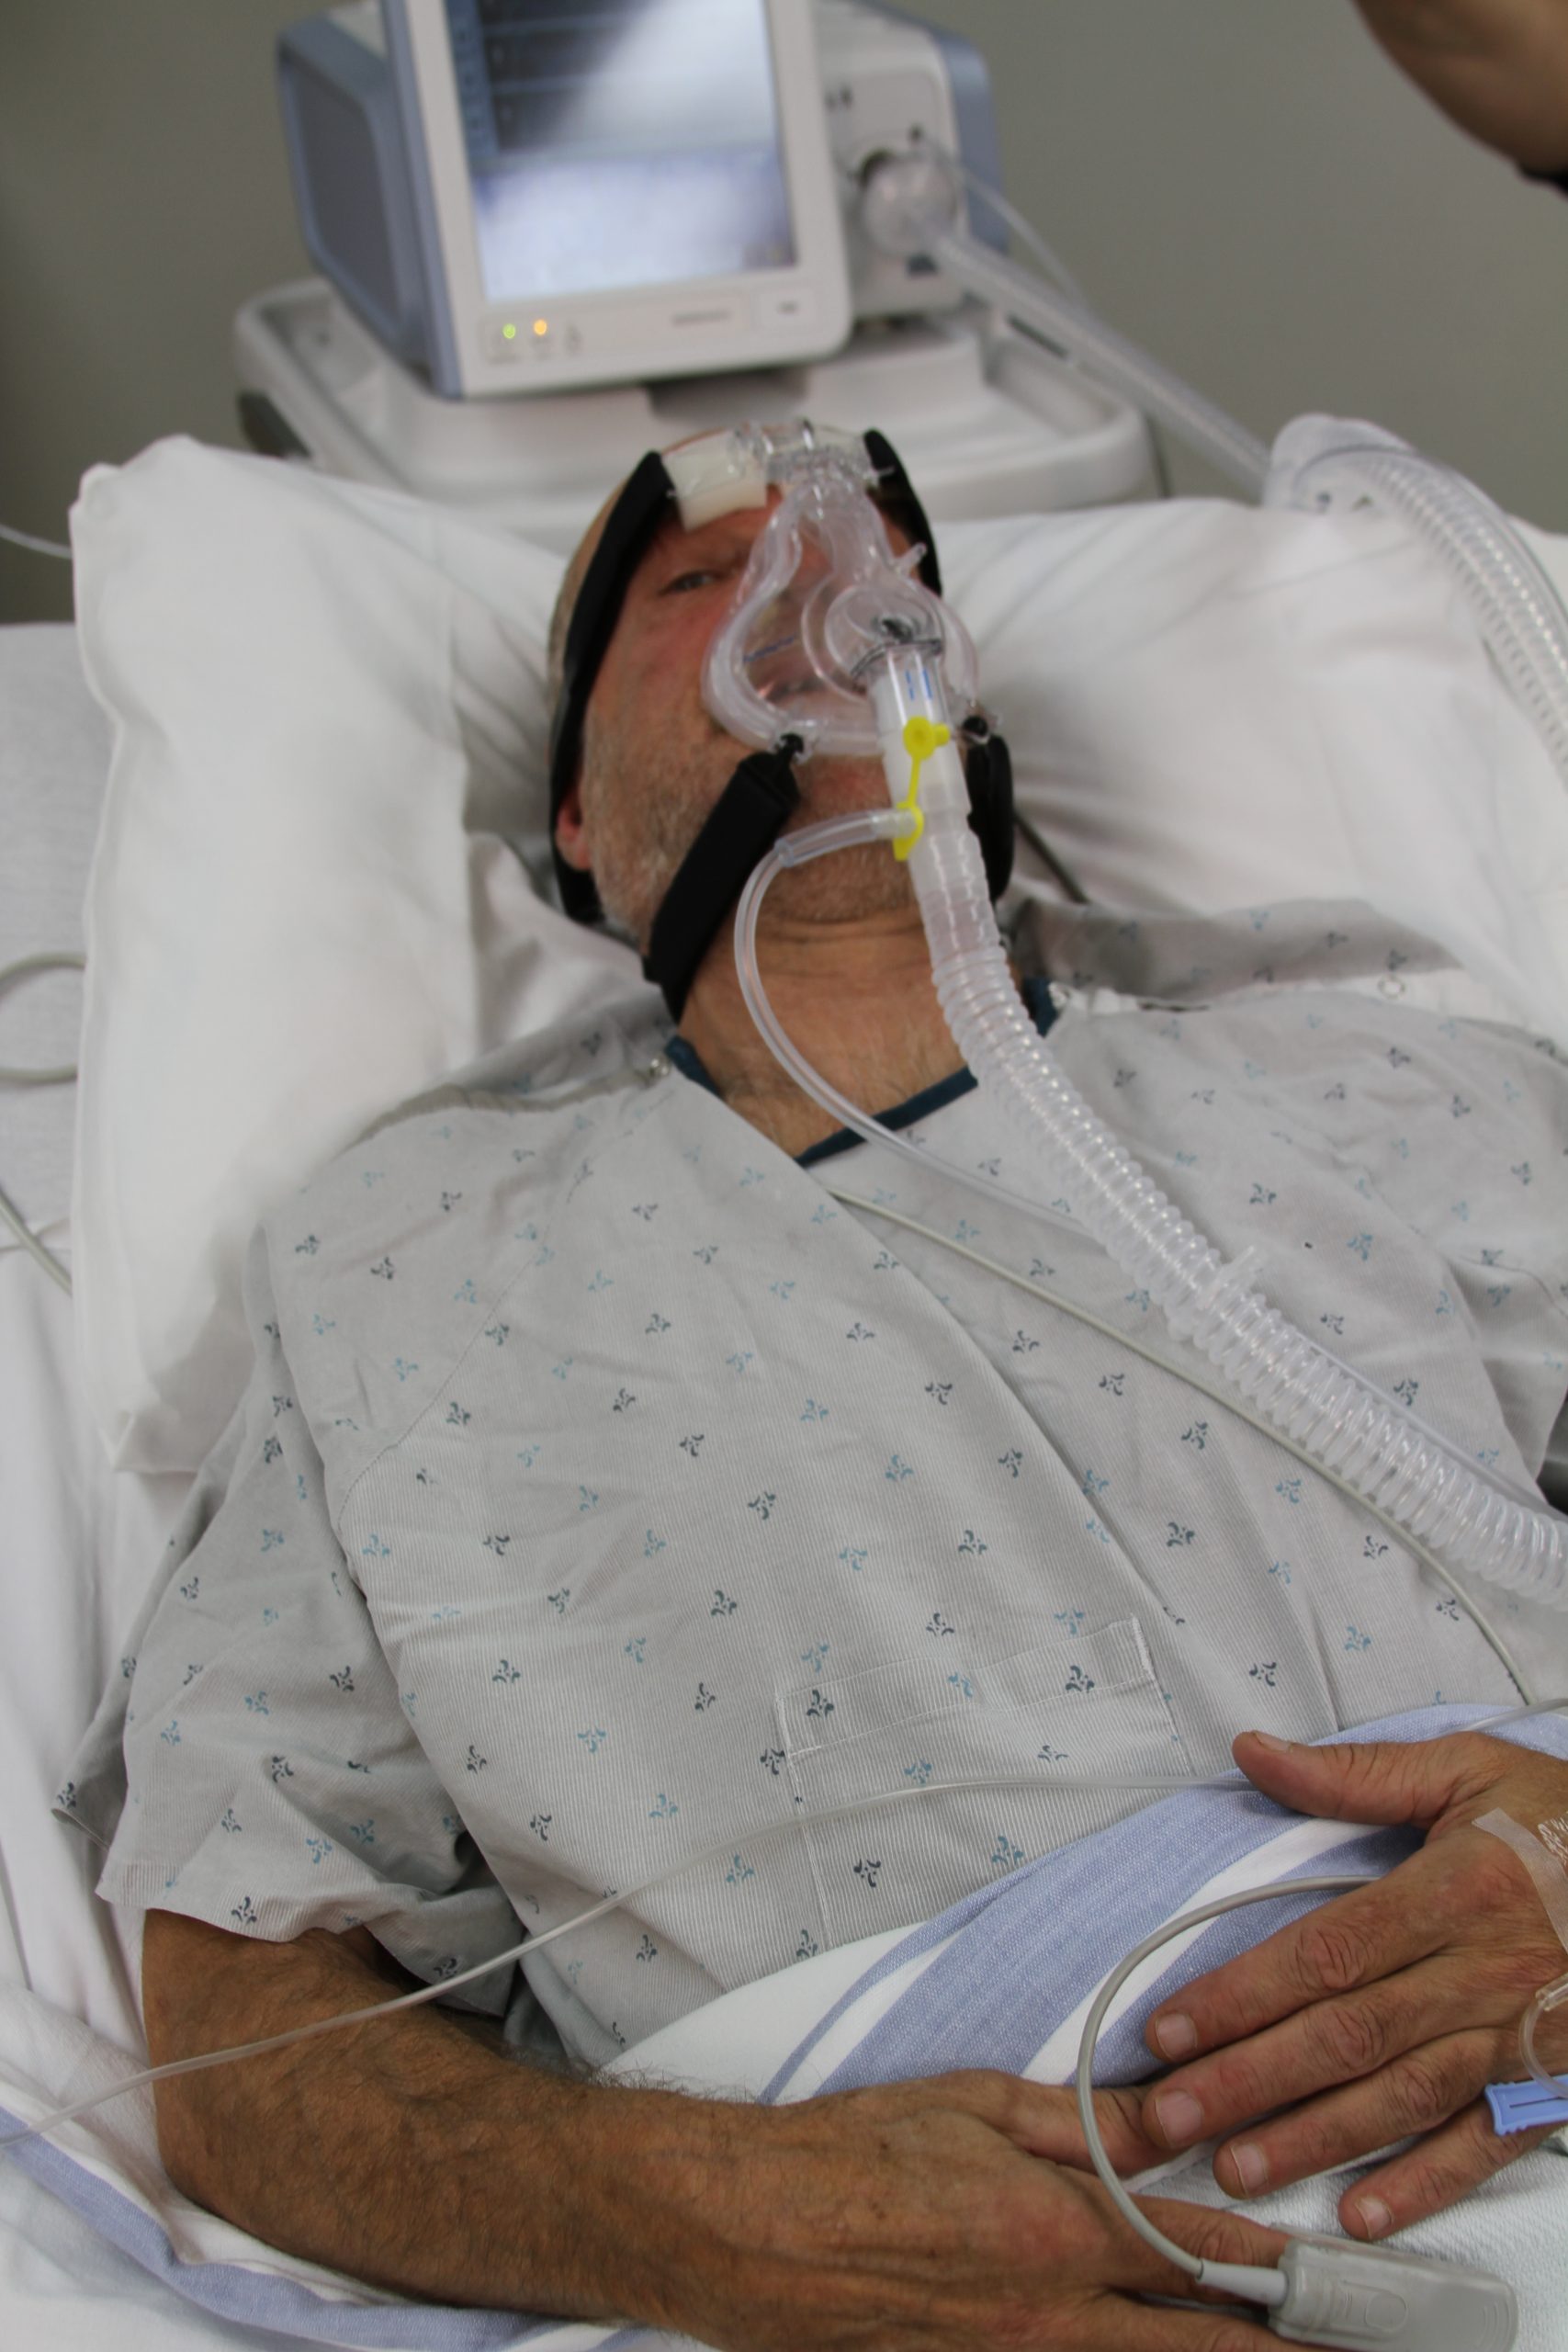 Image showing a simulated patient wearing a BiPAP mask